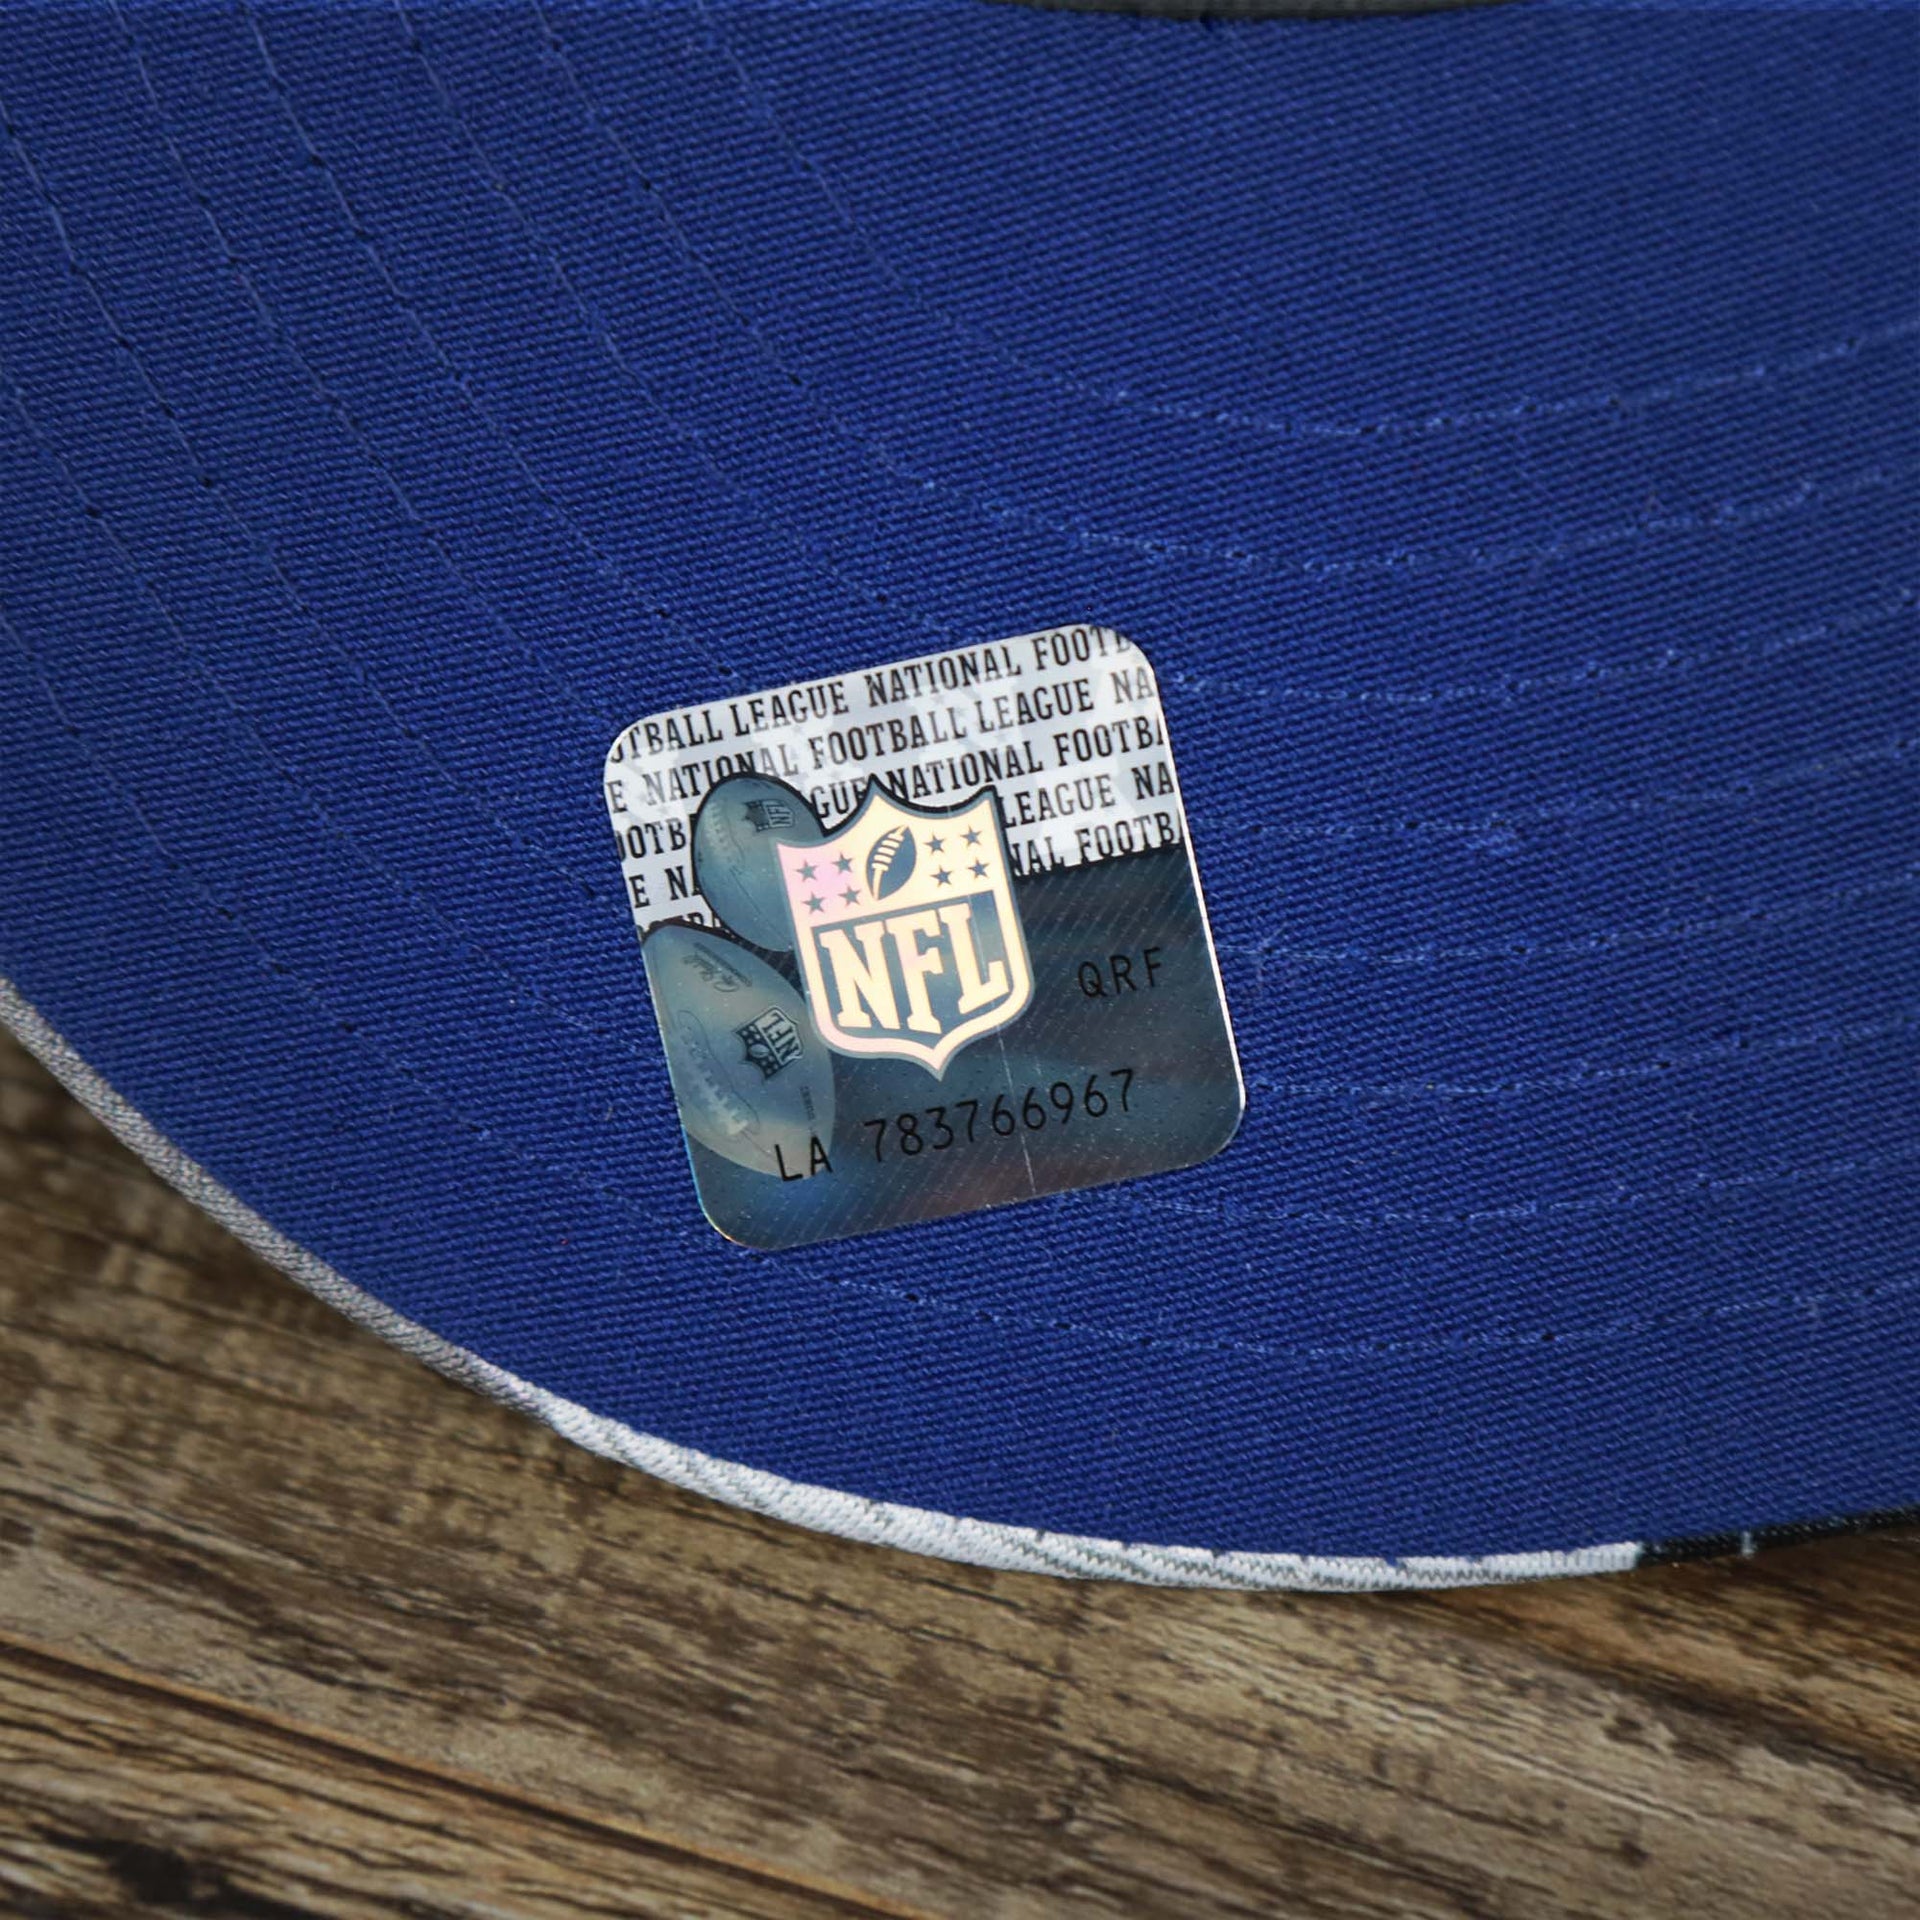 The NFL Sticker on the visor of the NFL Logo OnField Summer Training 2022 Camo 9Fifty Snapback | Royal Blue Camo 9Fifty